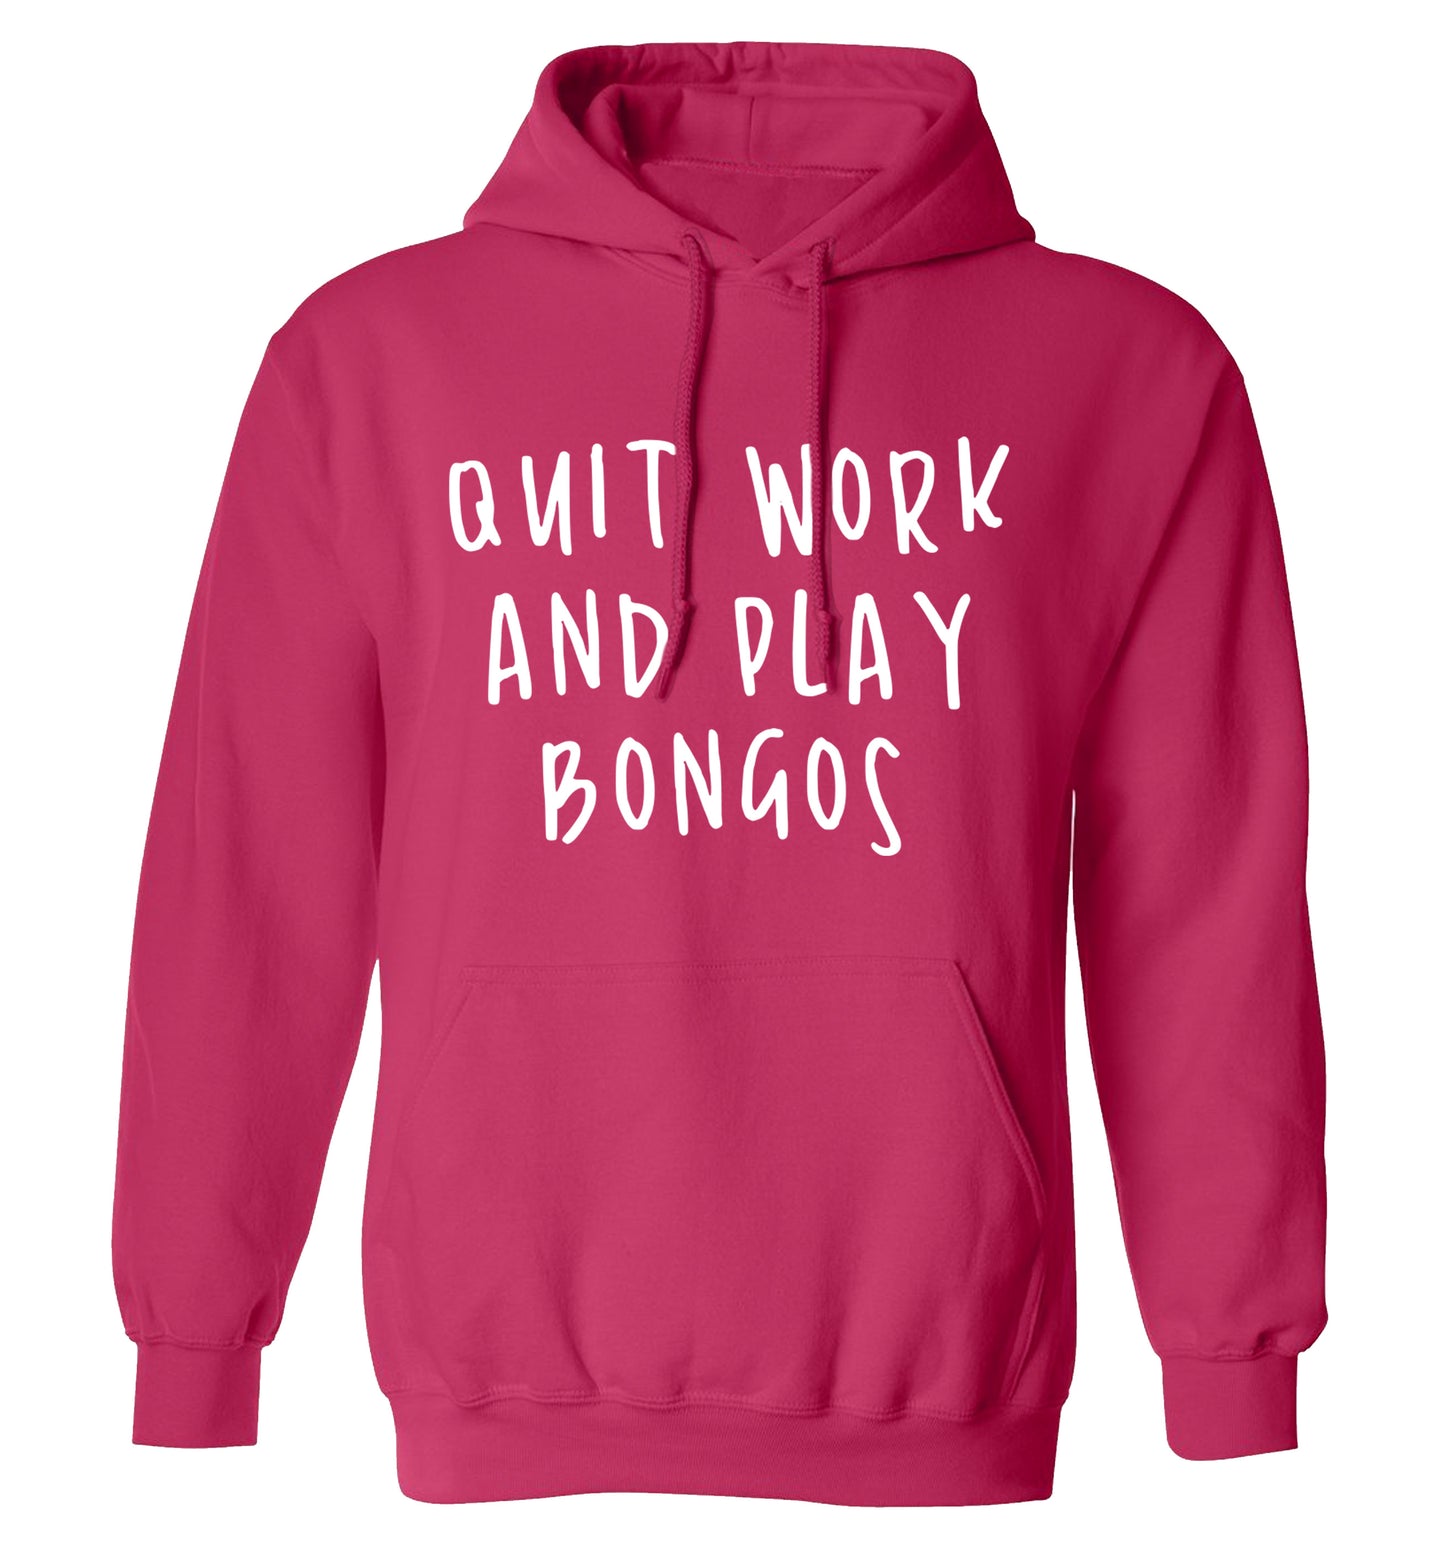 Quit work and play bongos adults unisex pink hoodie 2XL